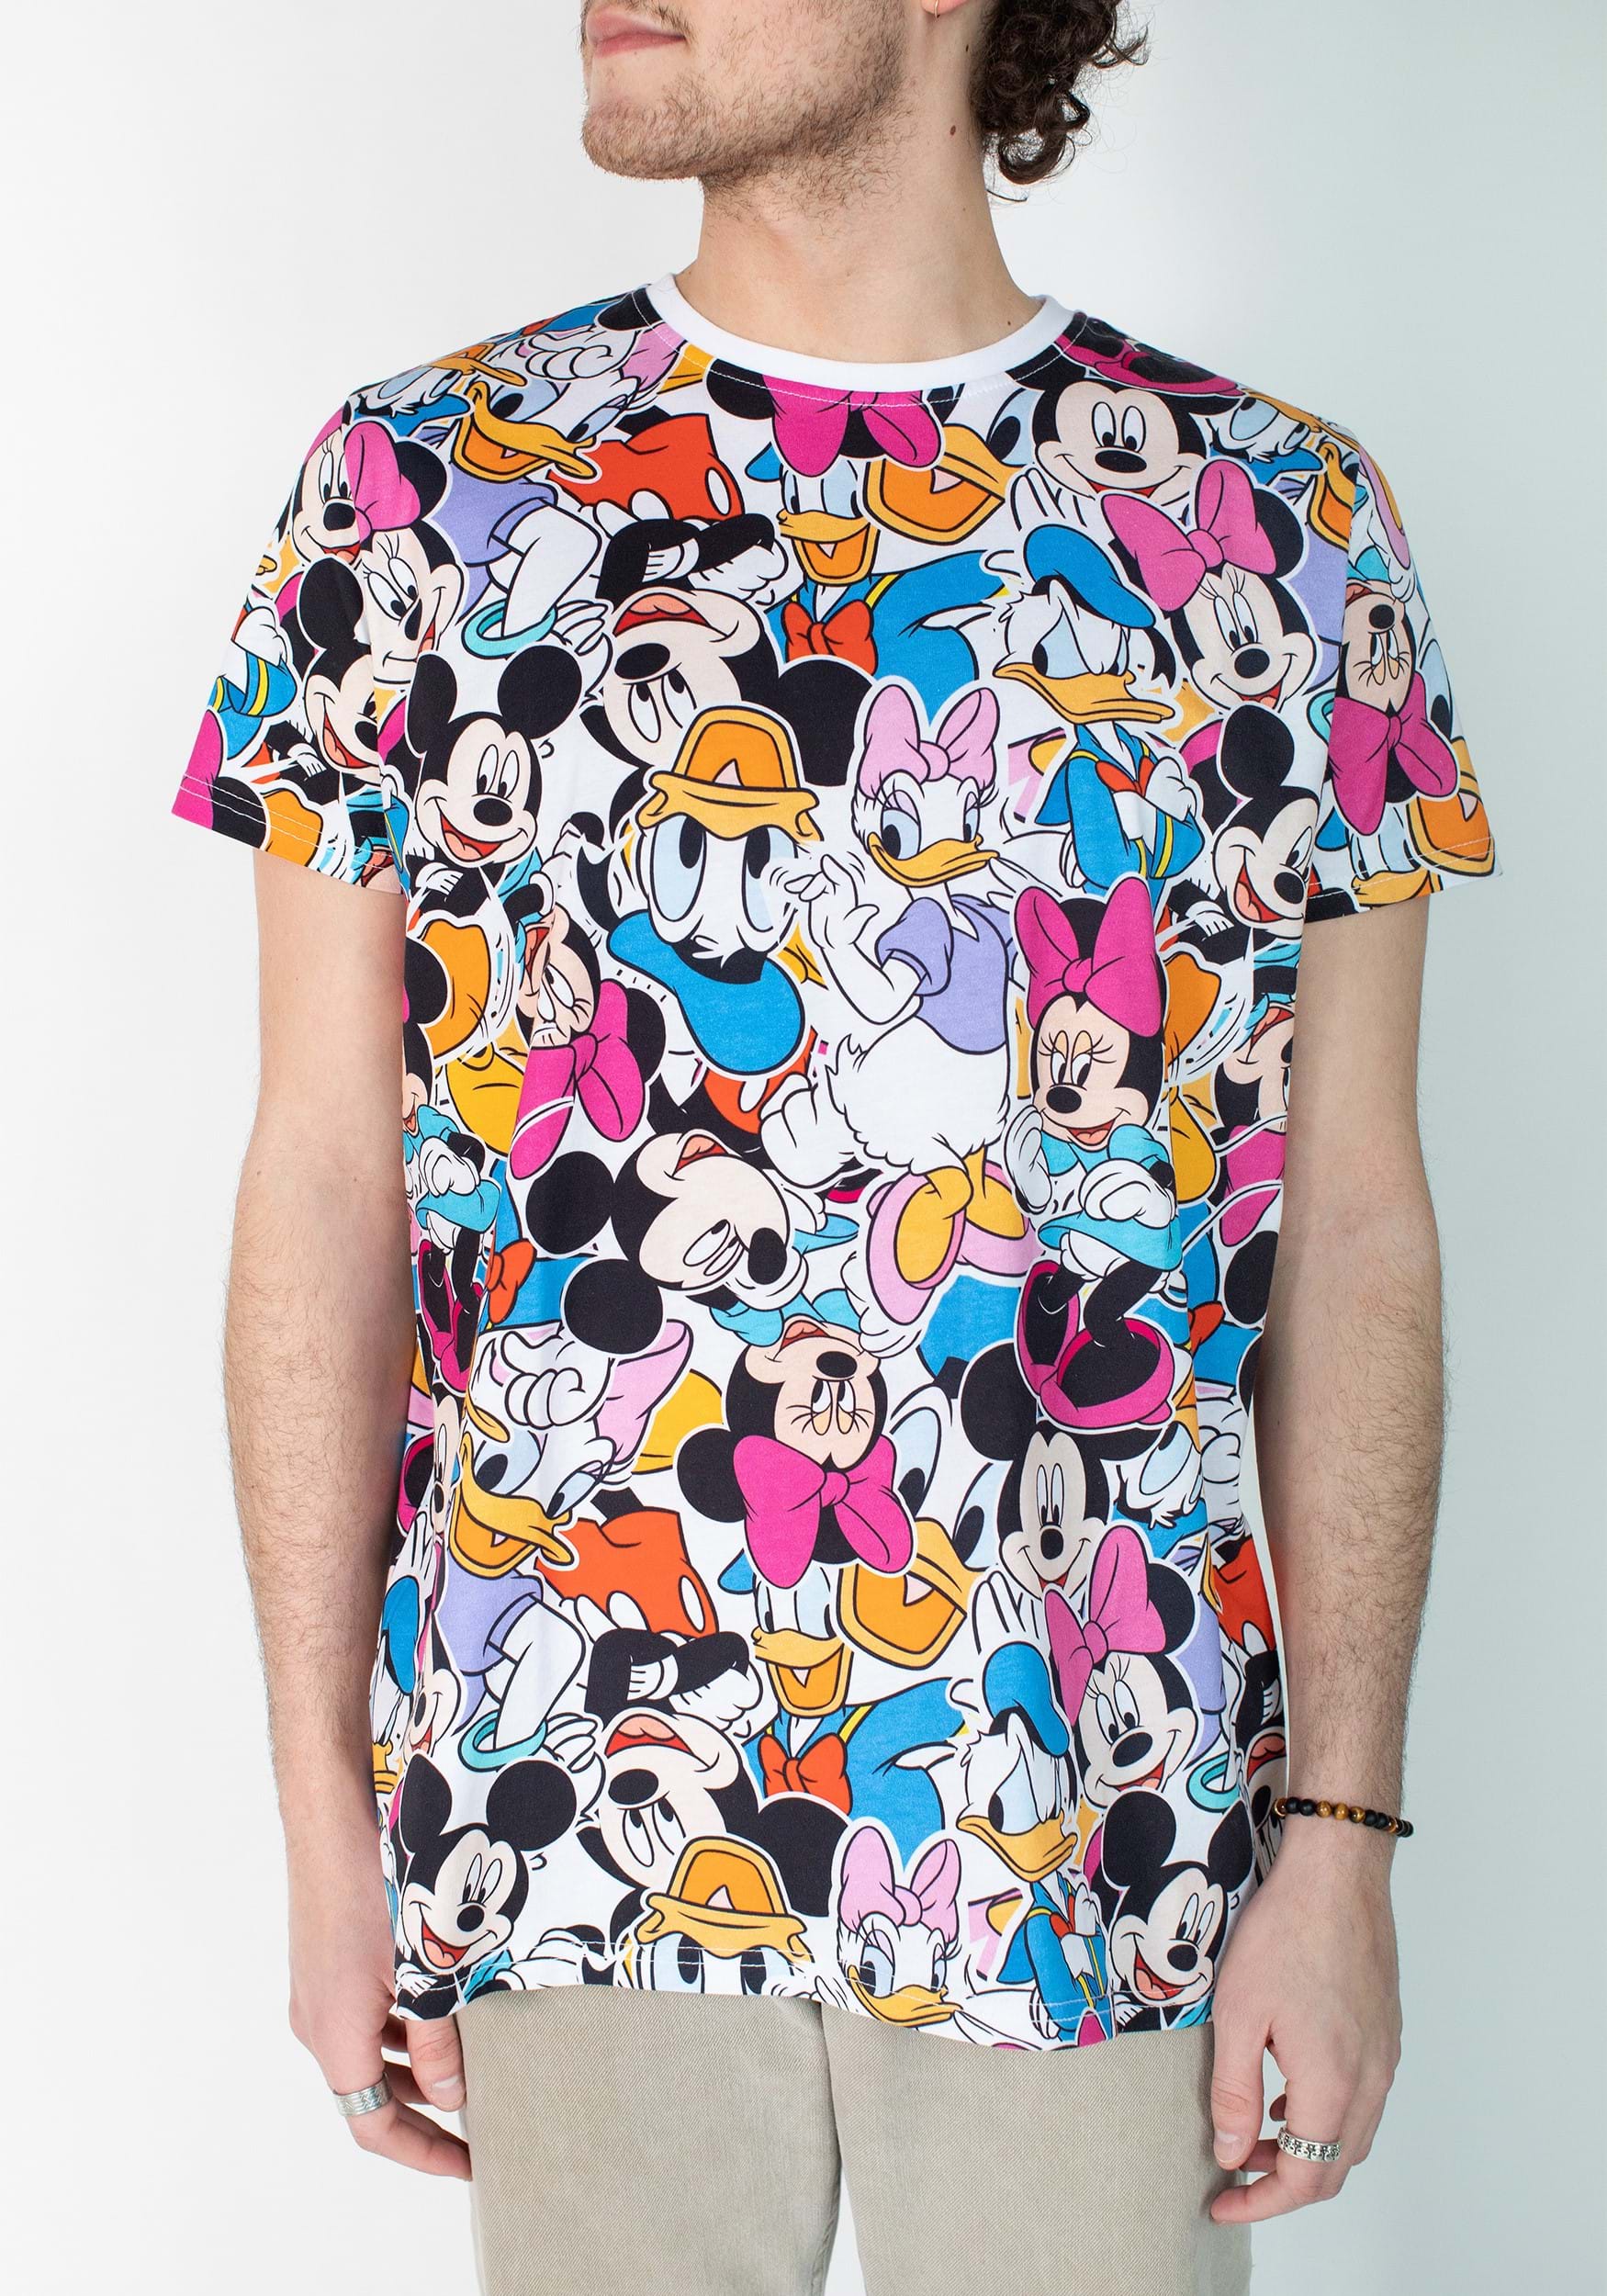 Mickey Mouse Unisex Tee, Adult Disney Clothes & T-shirts